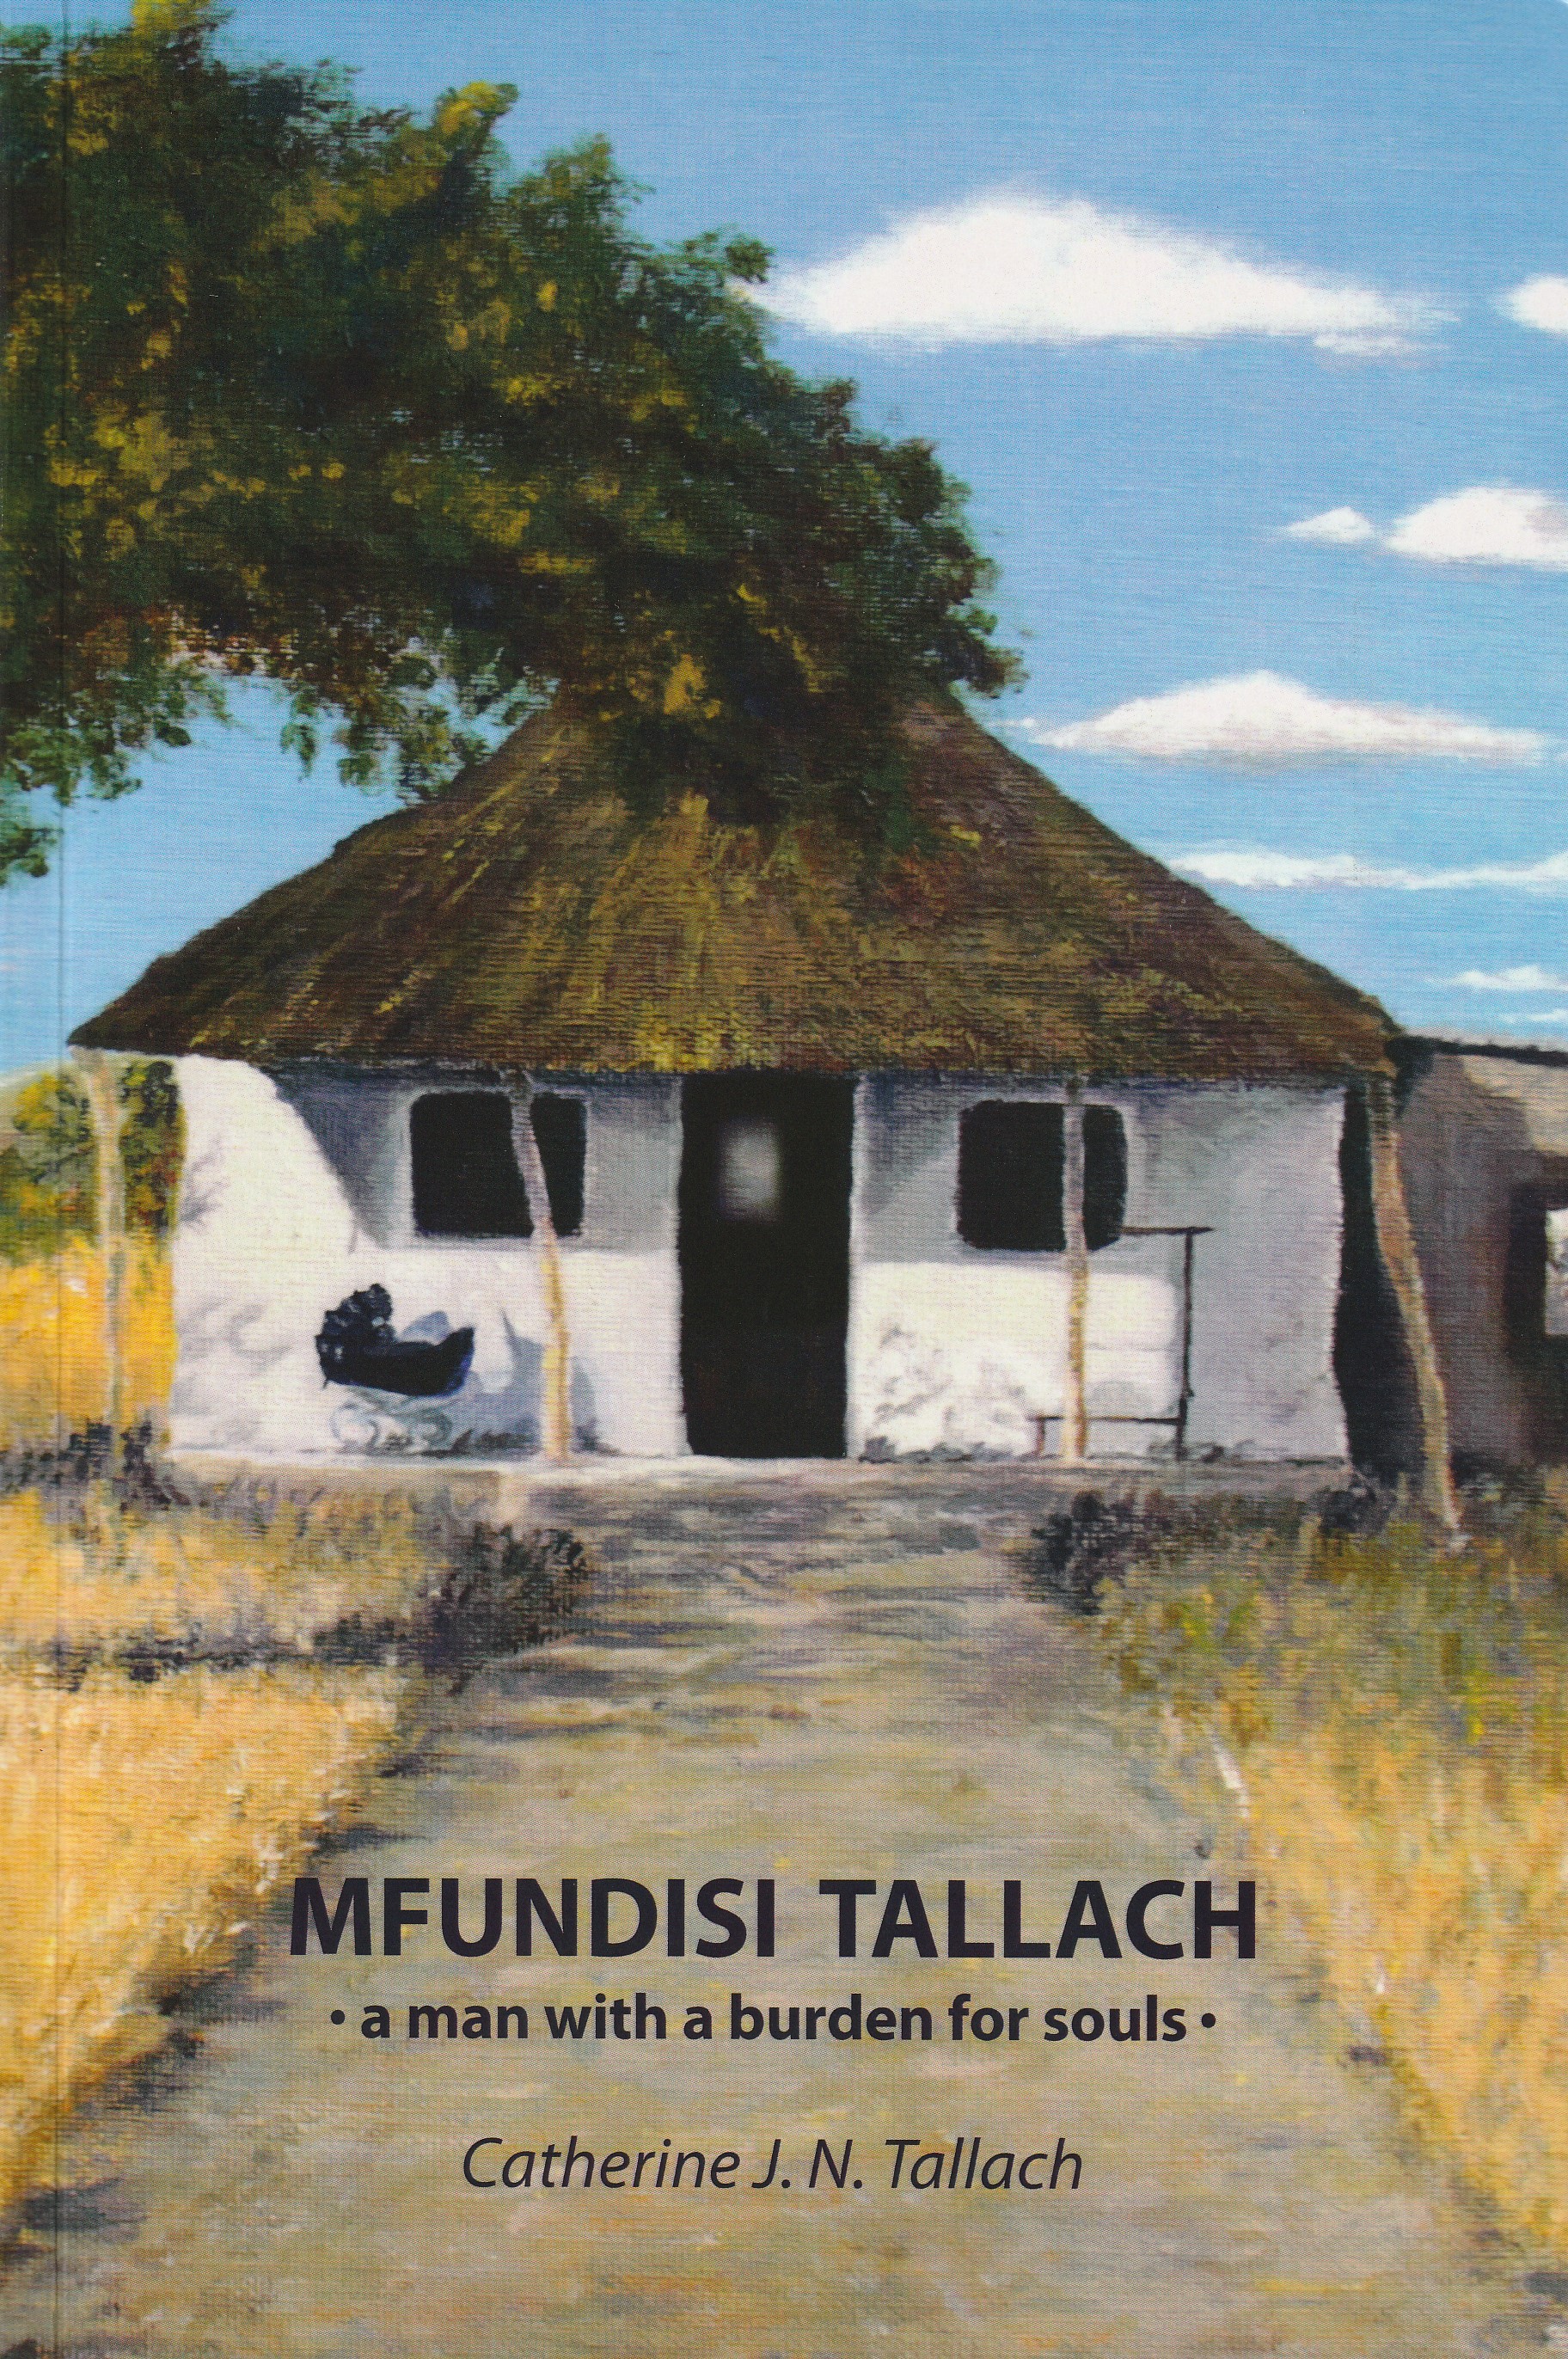 Mfundisi Tallach: A Man with a Burden for Souls